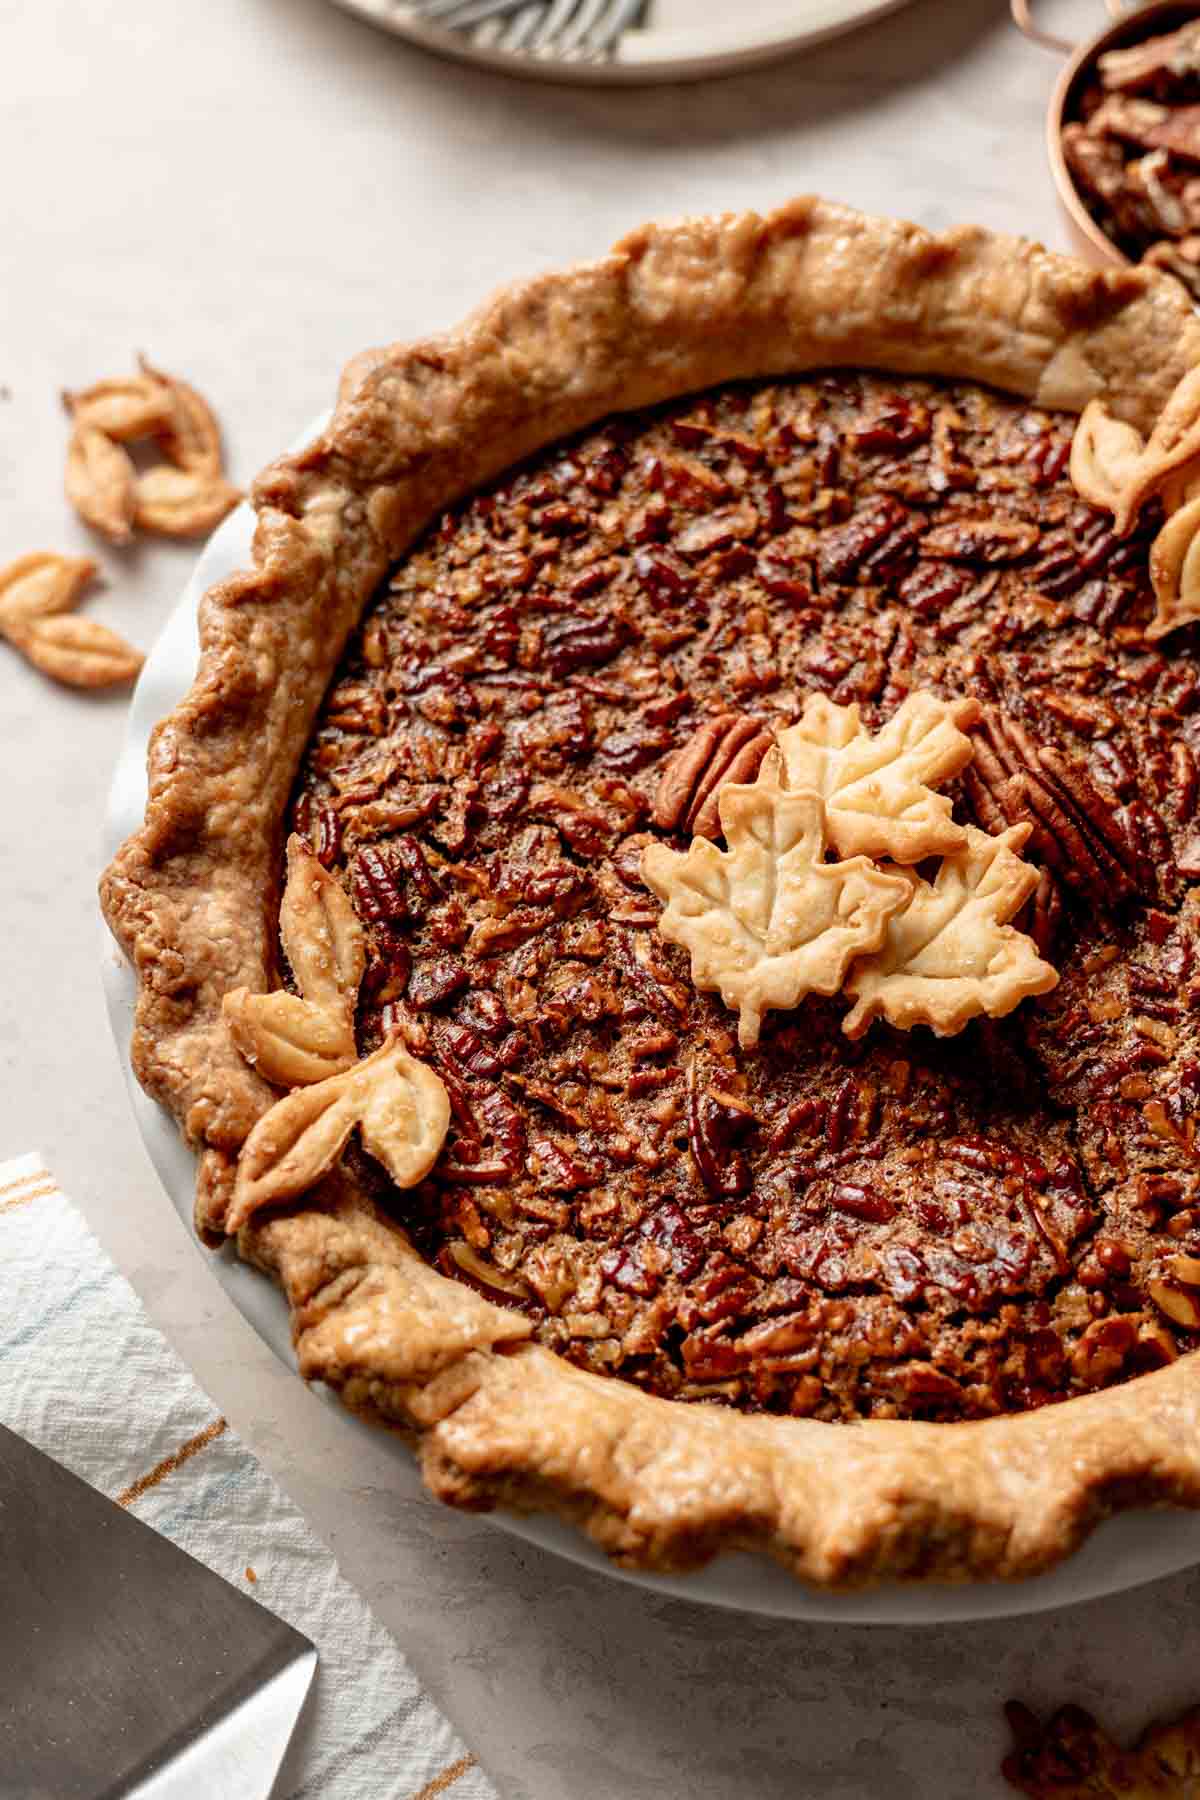 Whole gluten free pecan pie in golden brown pie crust with leave cutouts as garnish.